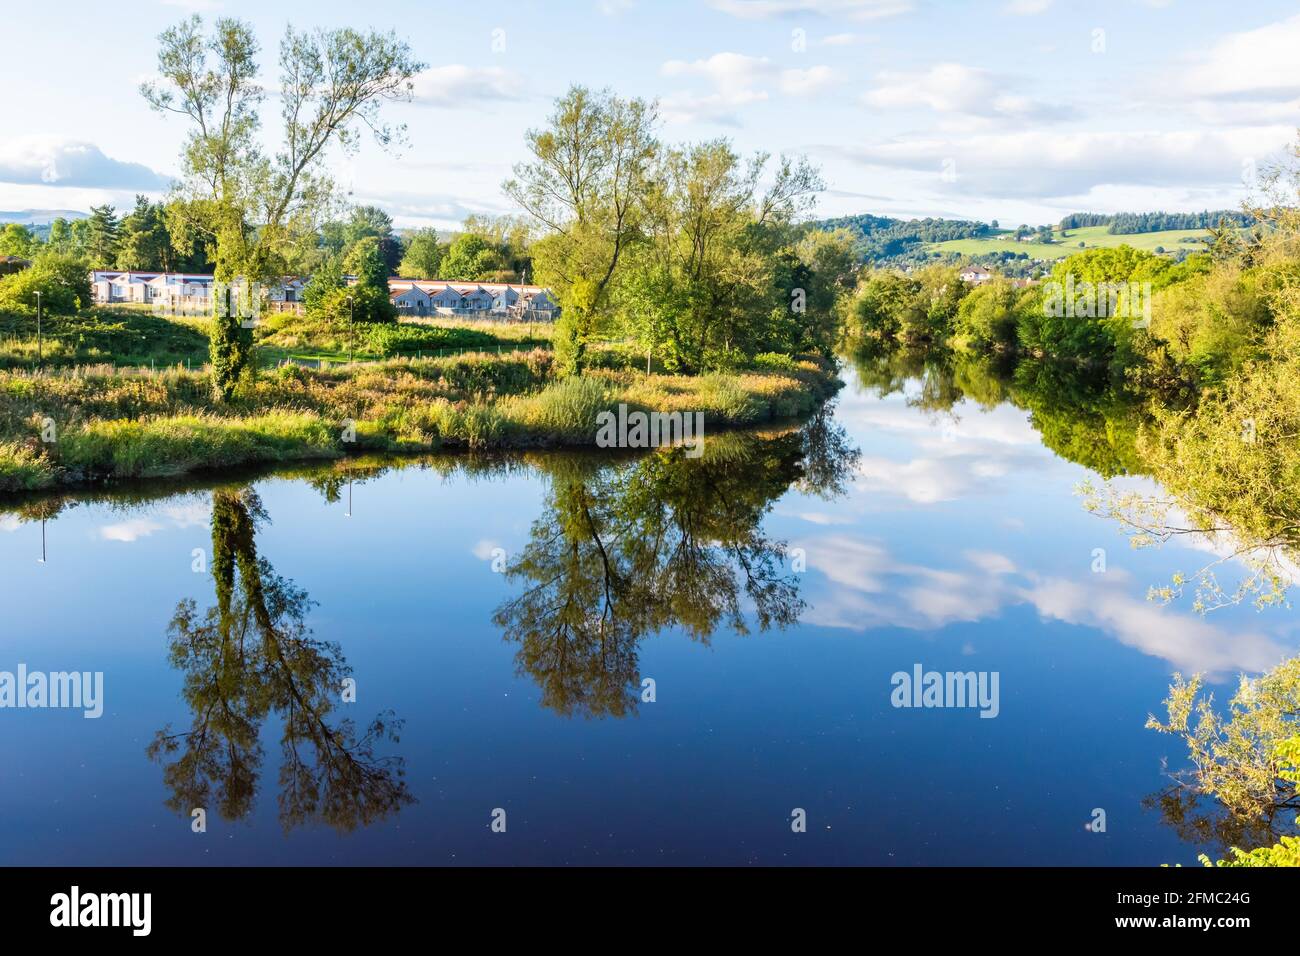 View of the River Forth near the city of Stirling in Scotland. Stock Photo